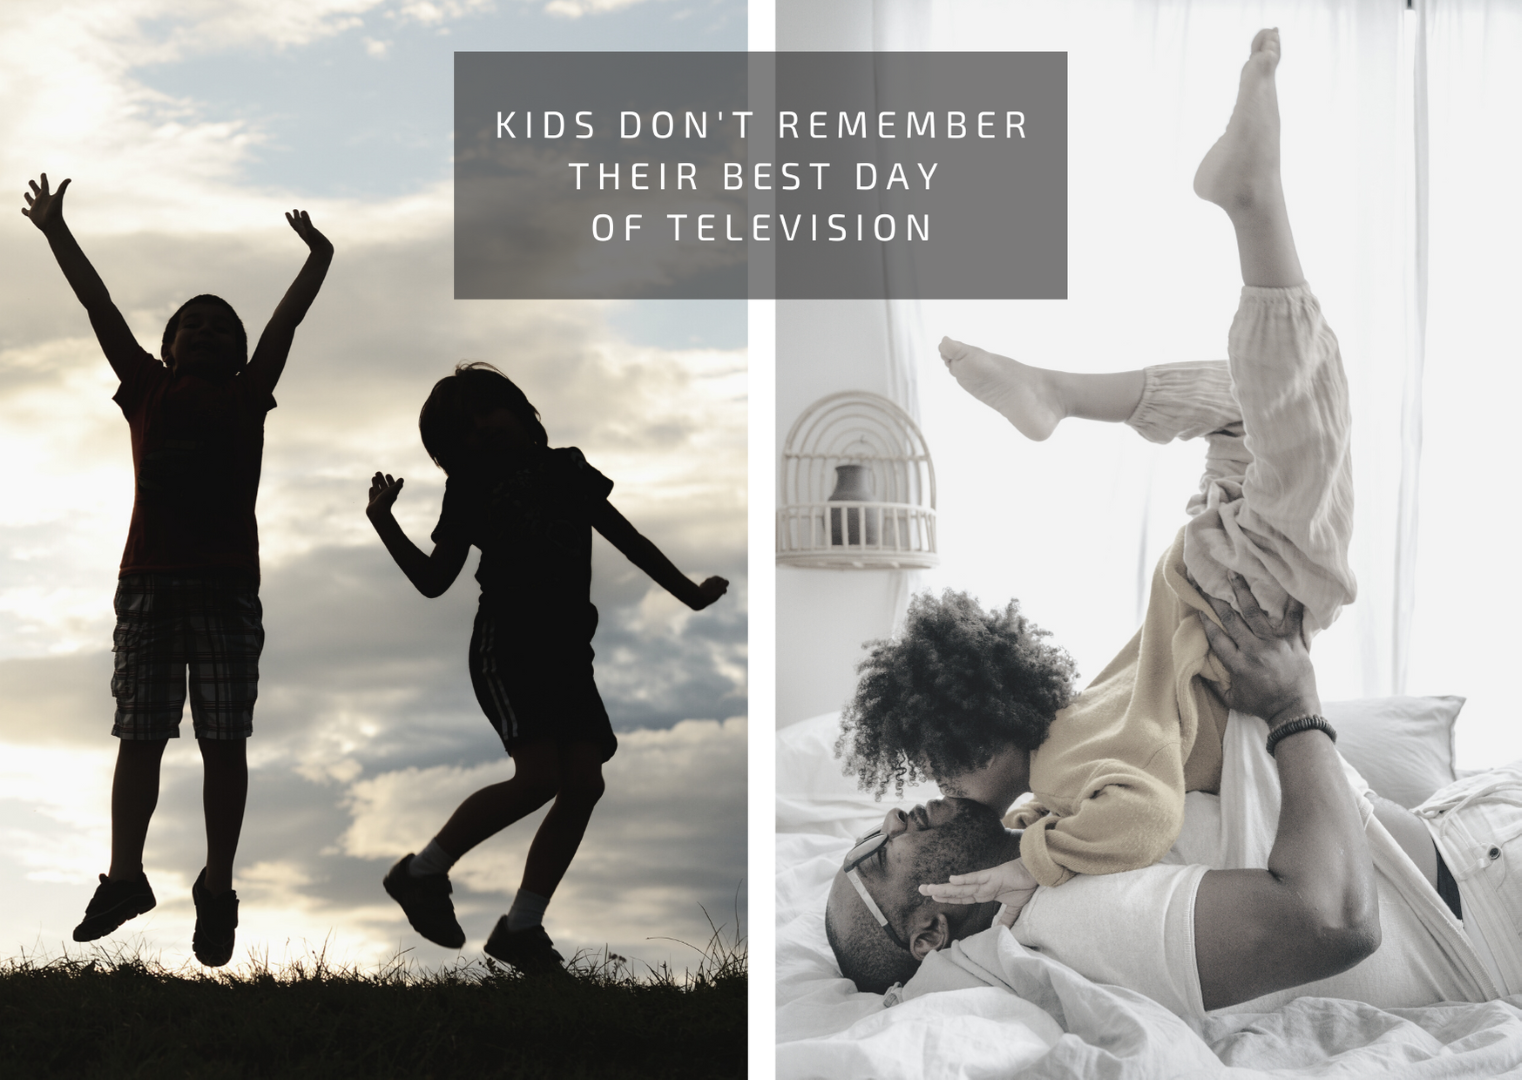 Kids don't remember their best day of television